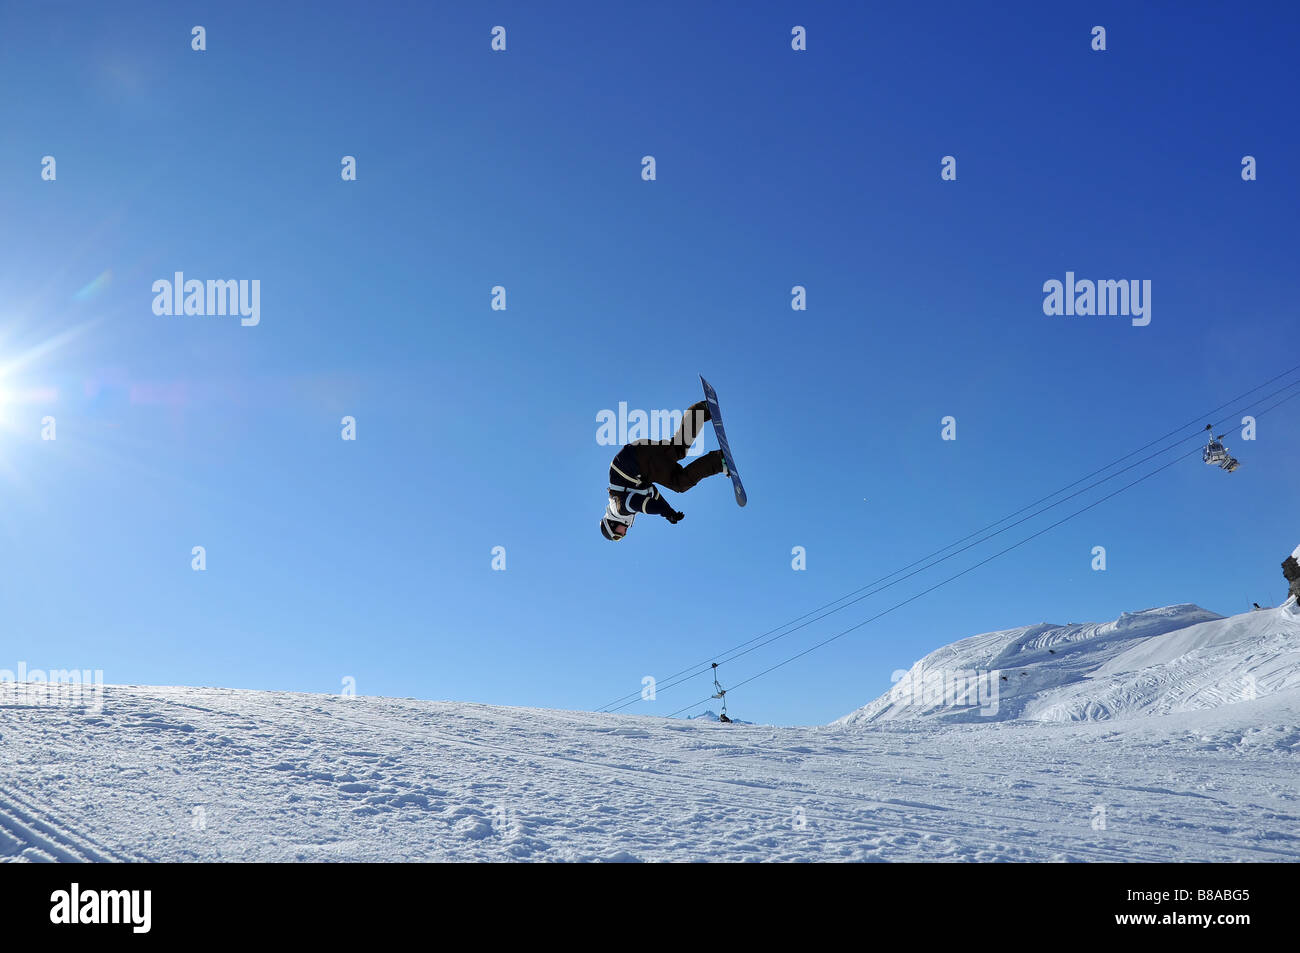 Aeroski A snow boarder performing a summersault Stock Photo